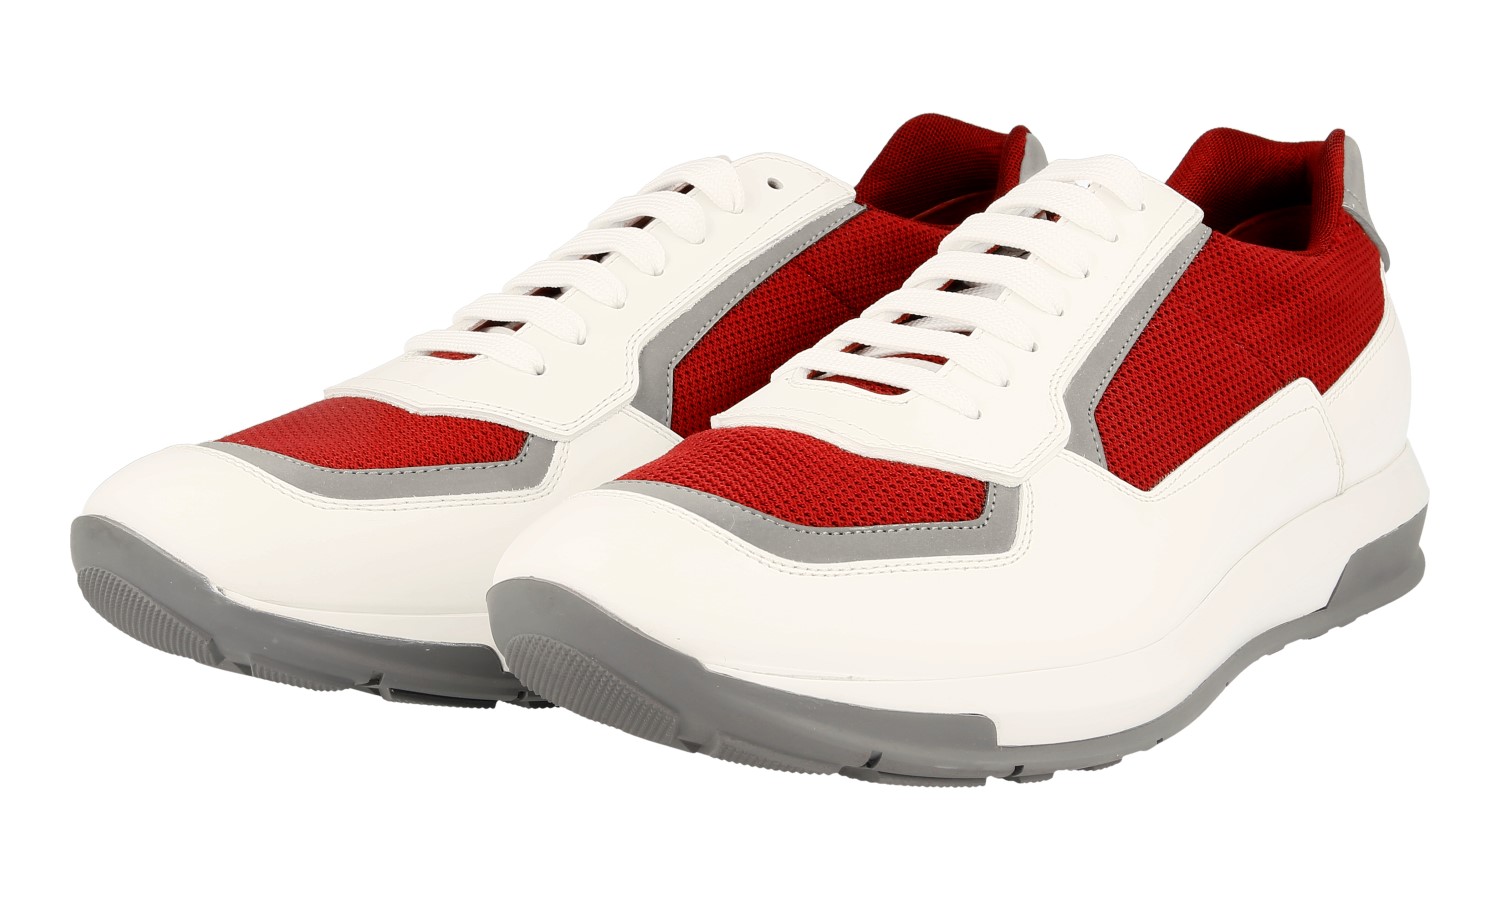 Authentic Luxury Prada Sneakers Shoes 4e3020 White Red New Us 10